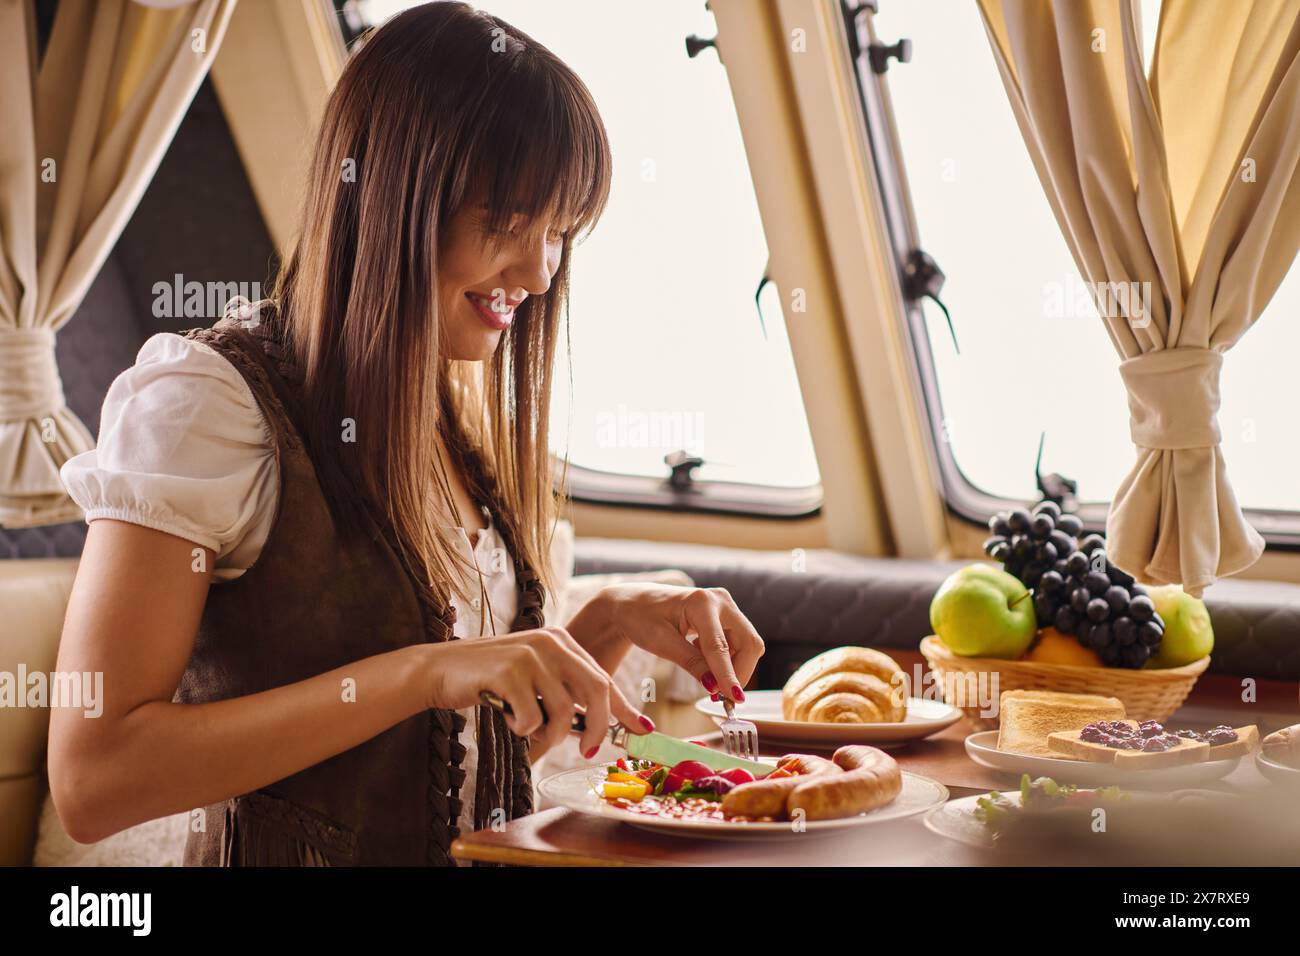 happy woman indulging in a delicious meal at a table in a cozy setting, savoring each bite of lunch. Stock Photo